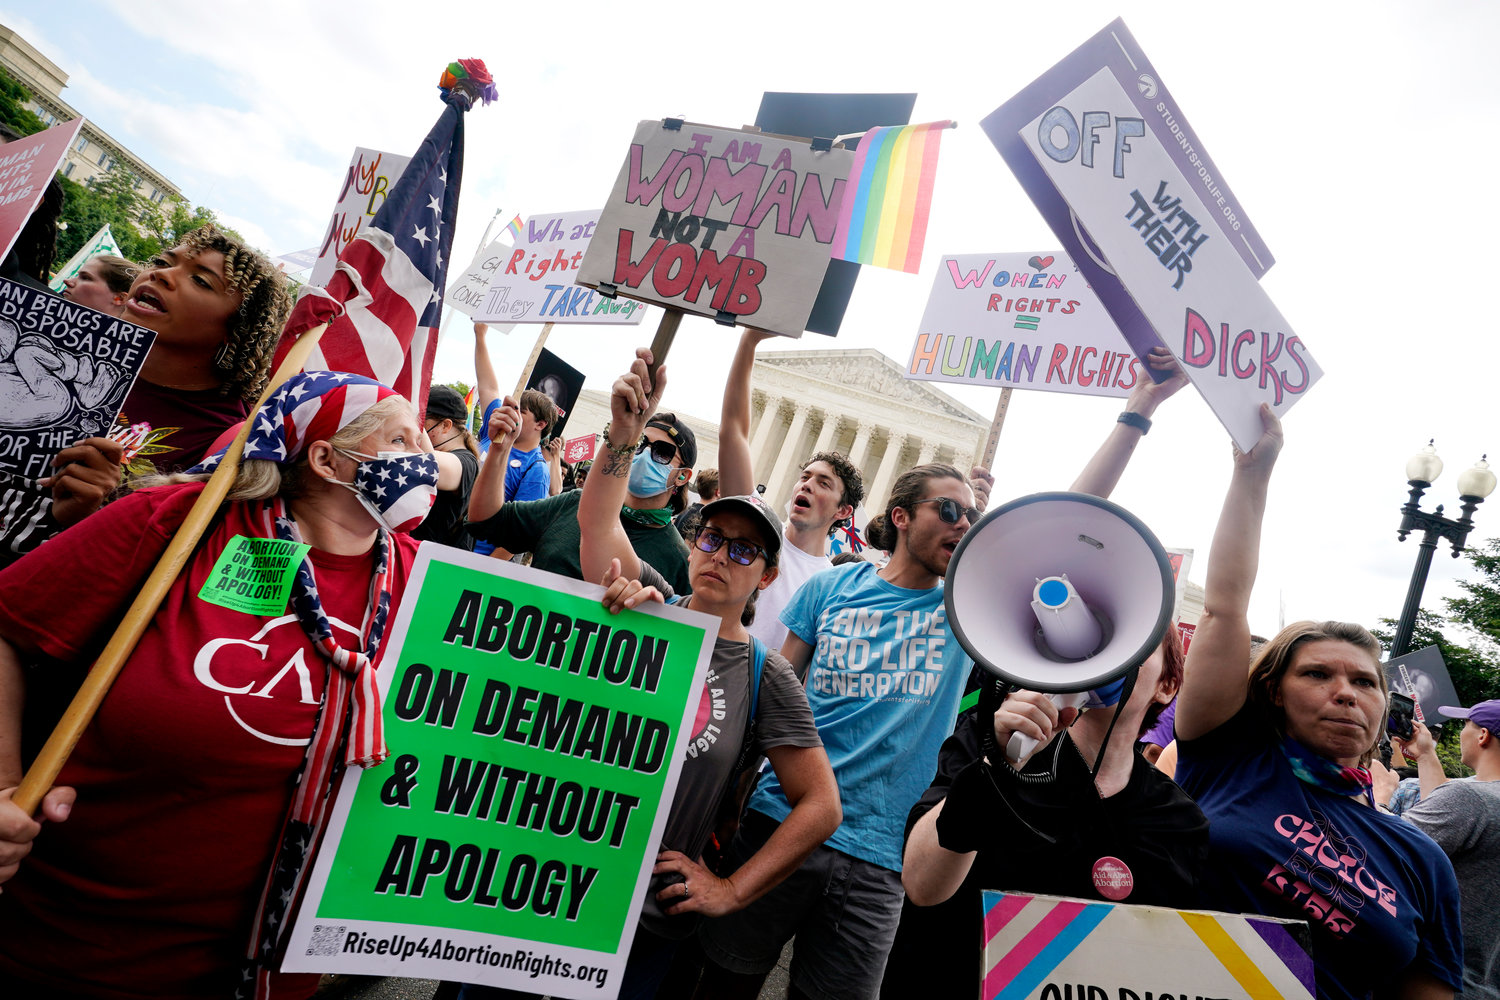 People protest the Supreme Court ruling outside the court in Washington, D.C. on Friday. The decision has ended constitutional protections for abortion that had been in place nearly 50 years. Signiciant impacts in New York are unlikely as state lawmakers passed rules to protect abortions in 2019 and also earlier this year.